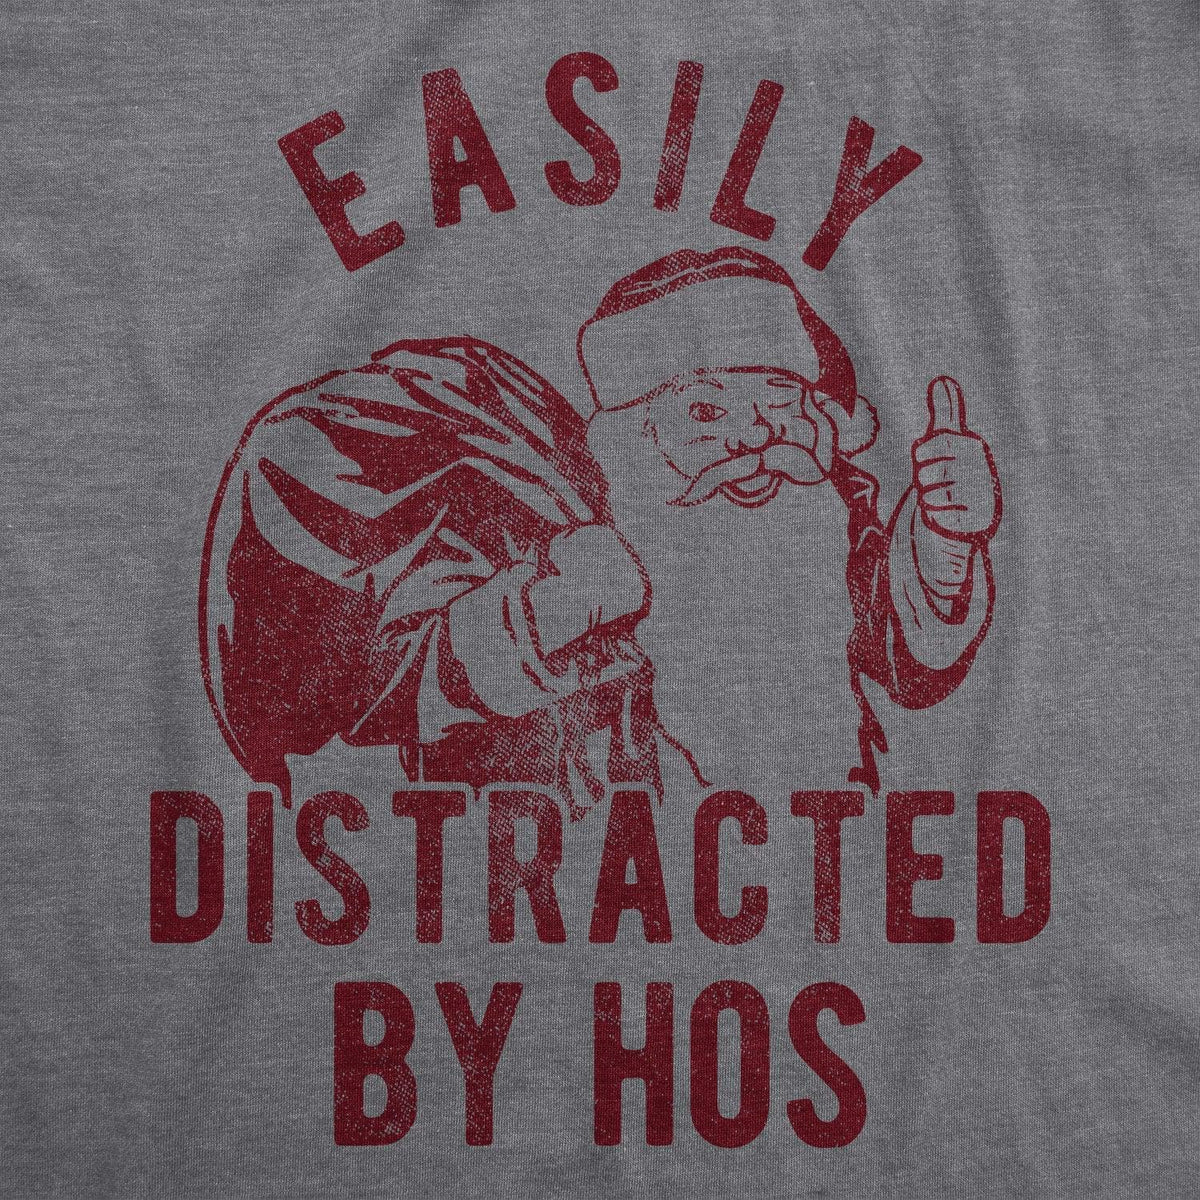 Easily Distracted By Hos Men&#39;s Tshirt  -  Crazy Dog T-Shirts